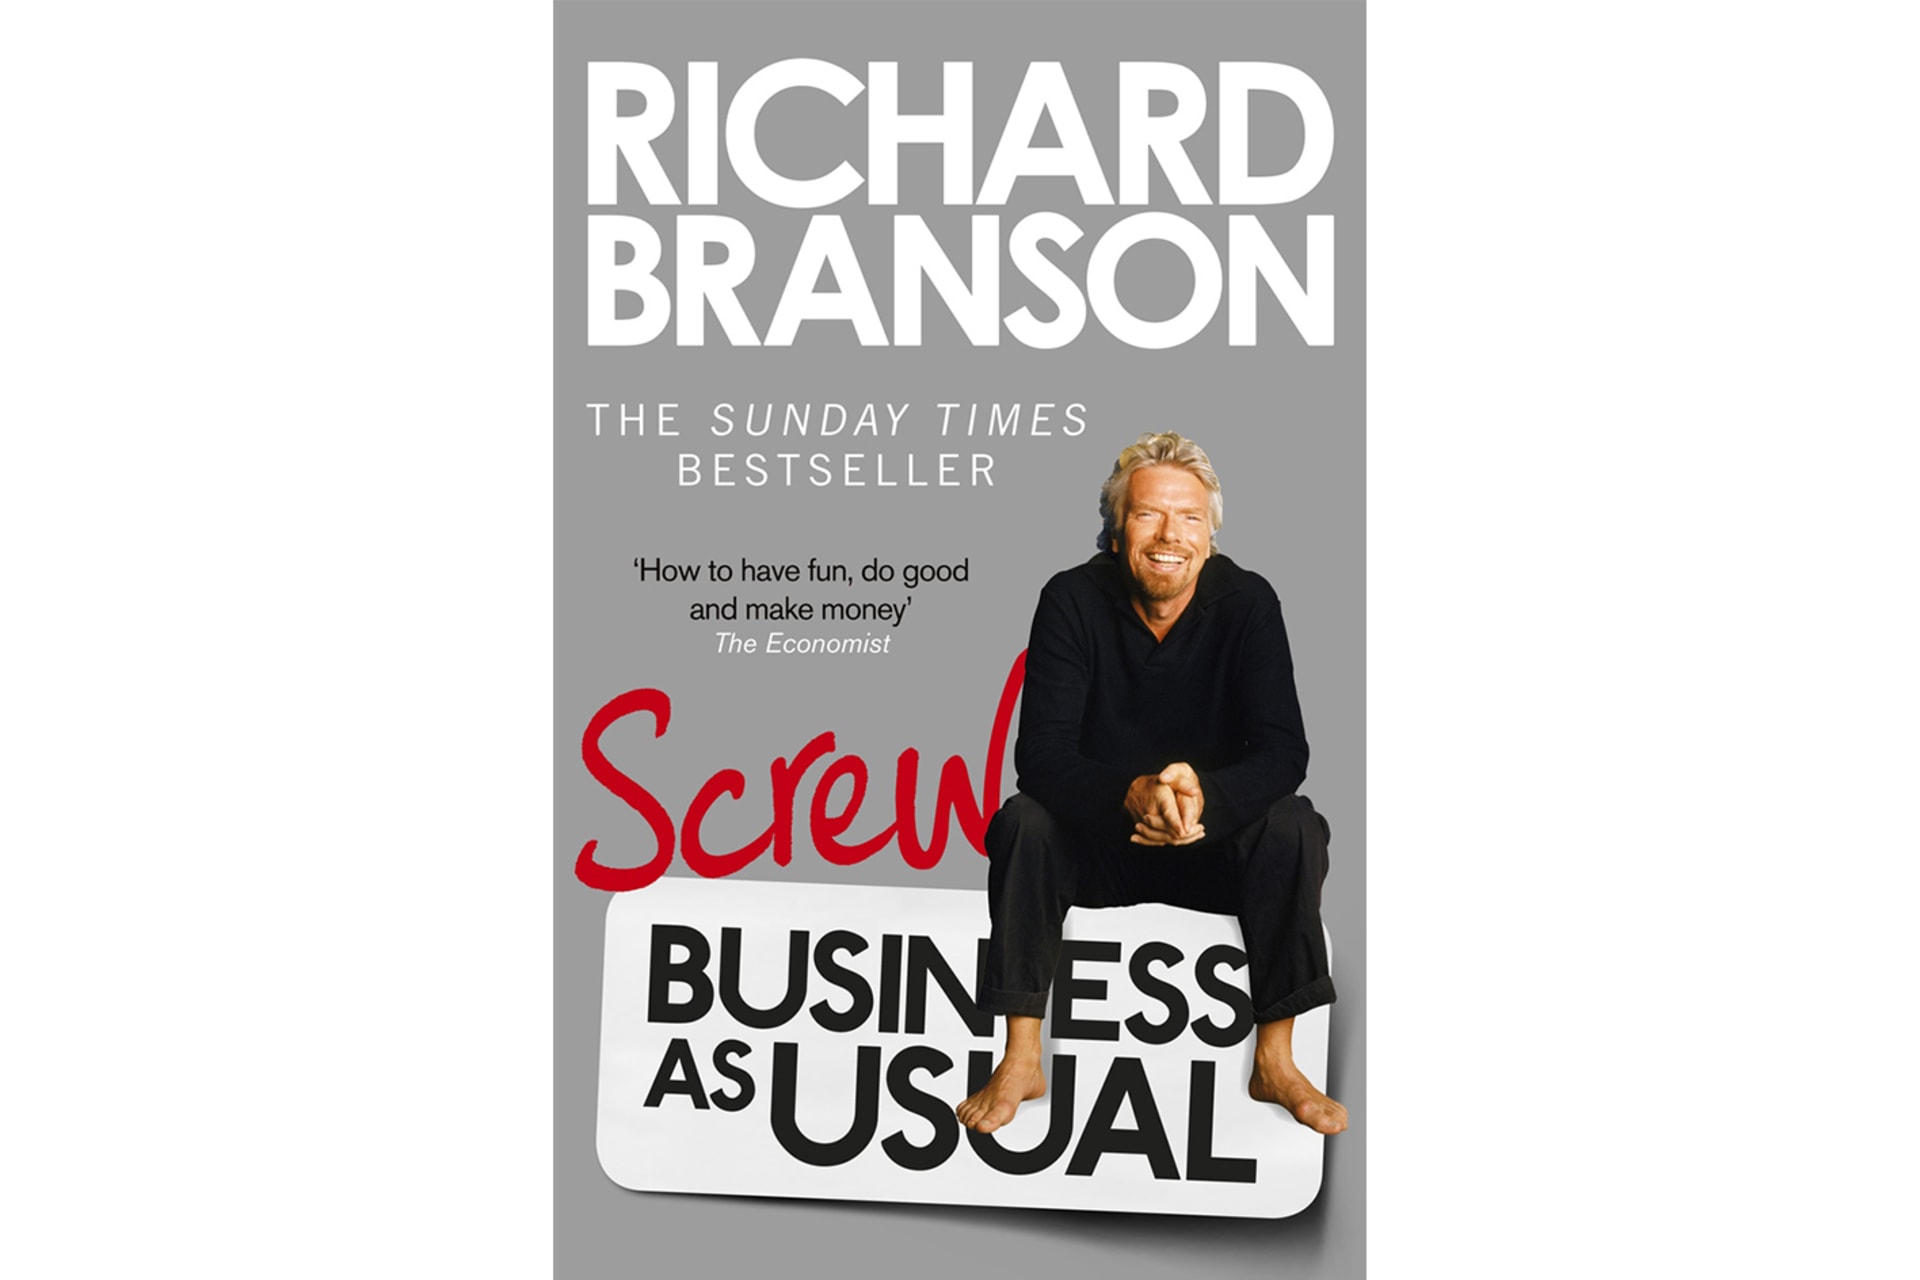 Richard Branson: Screw Business as Usual